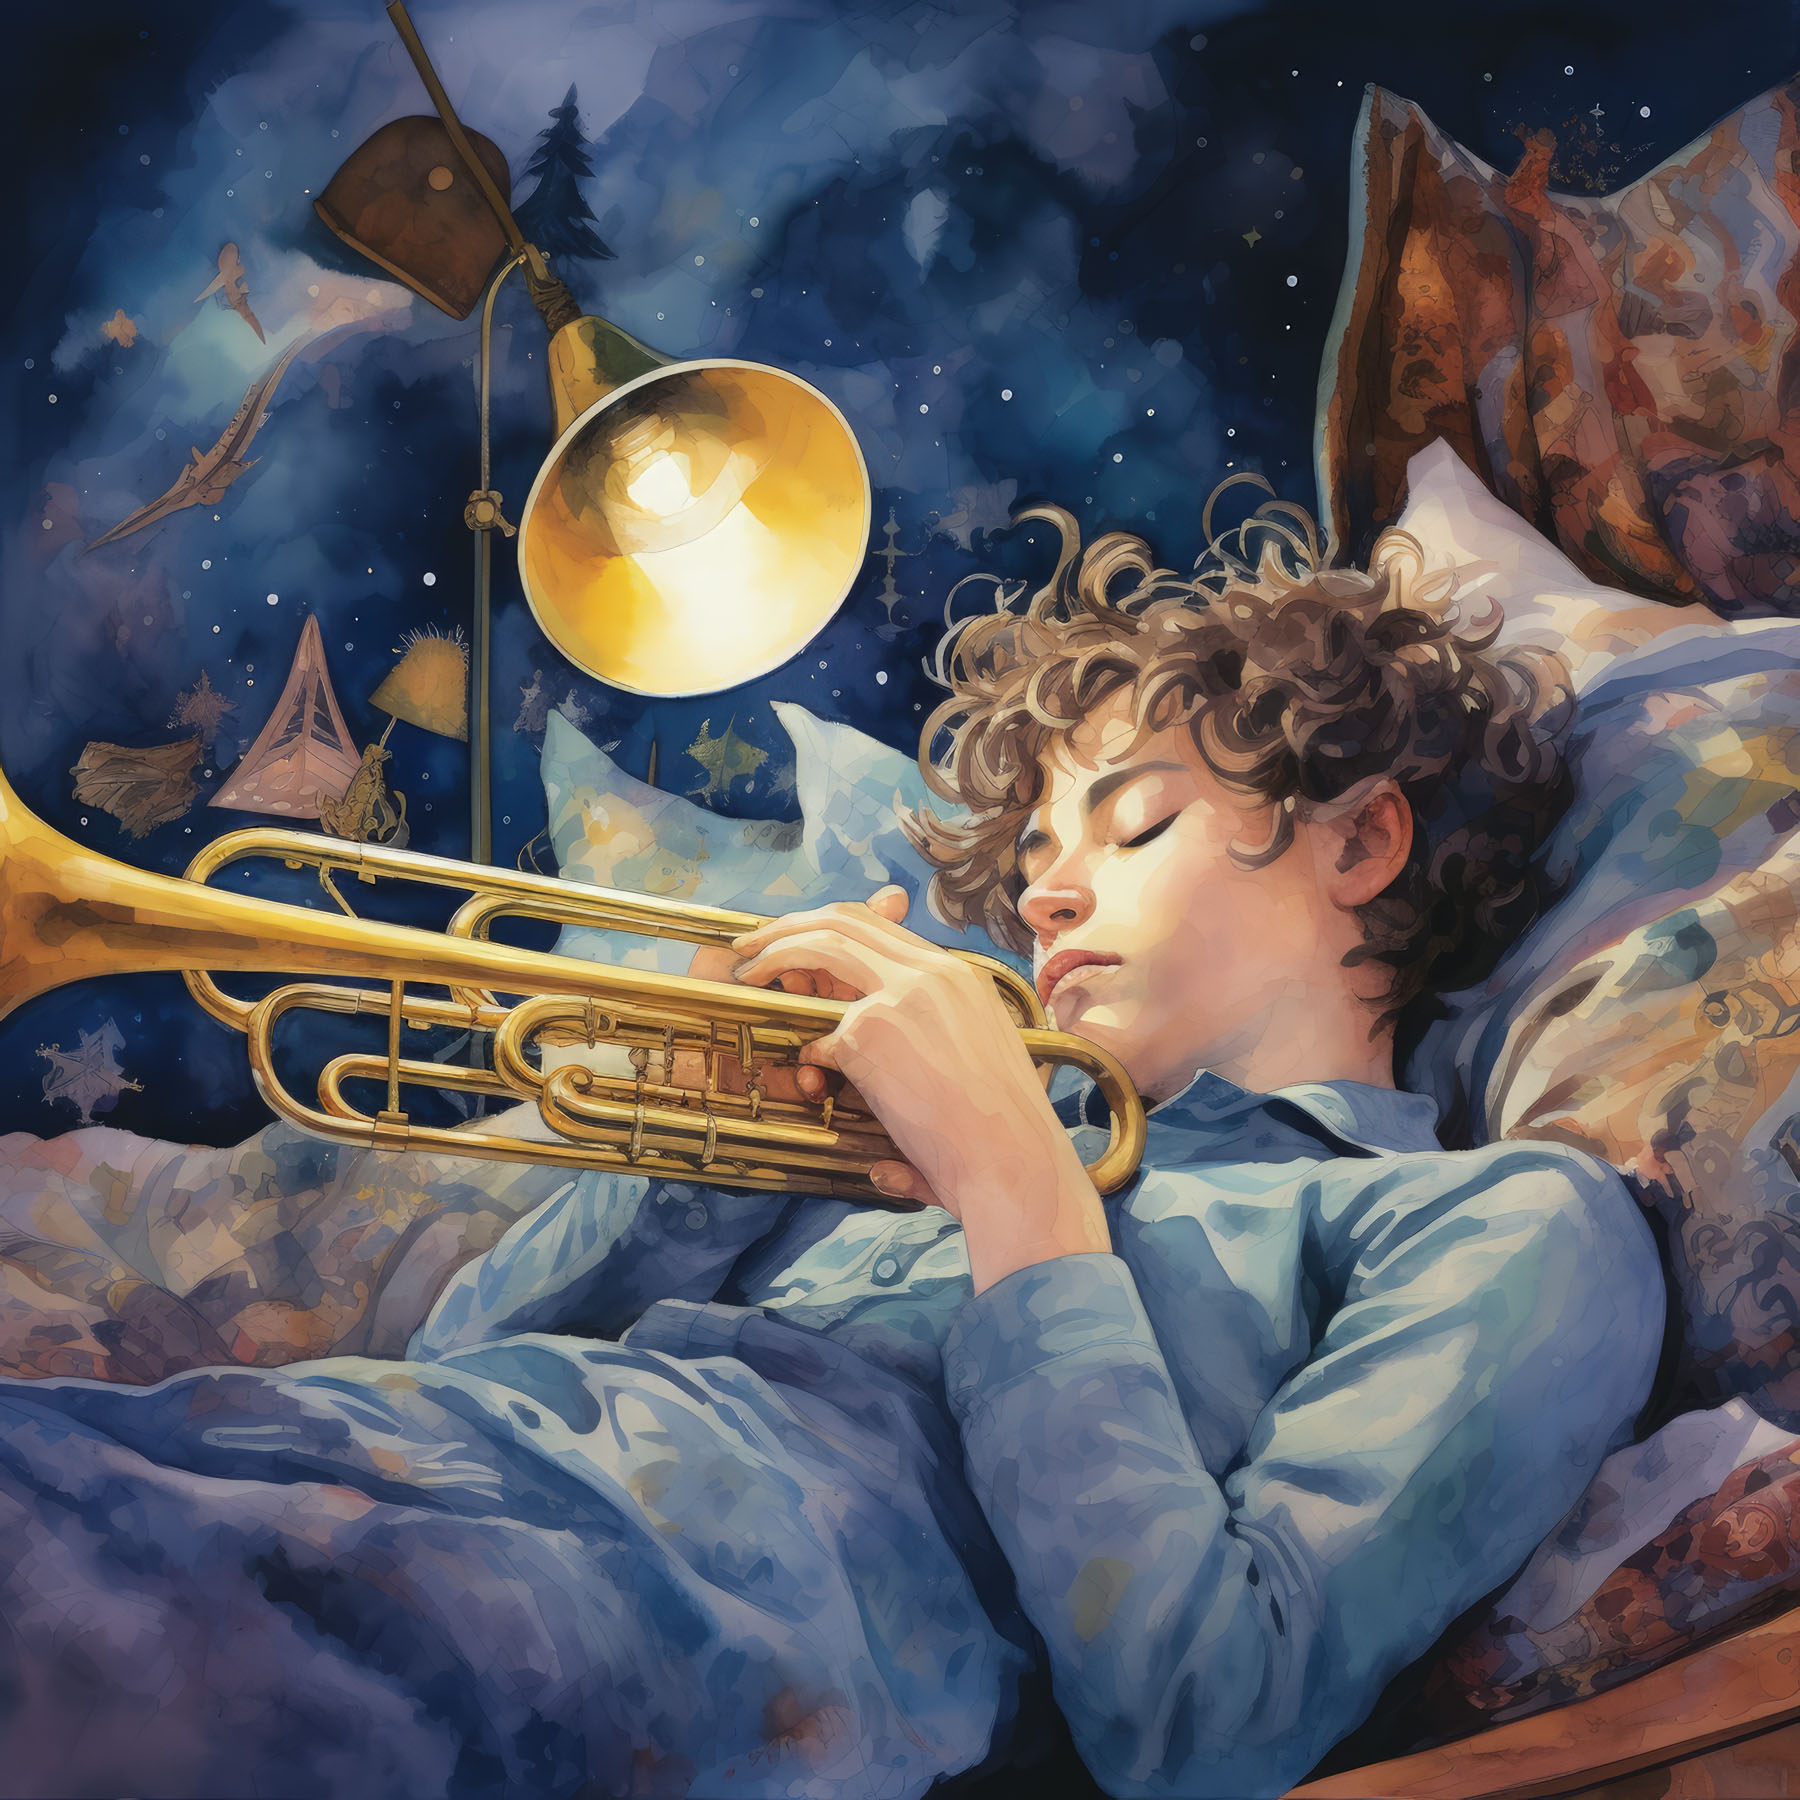 Curly brown haired boy in pajamas sleeps on a bed holding his trumpet.